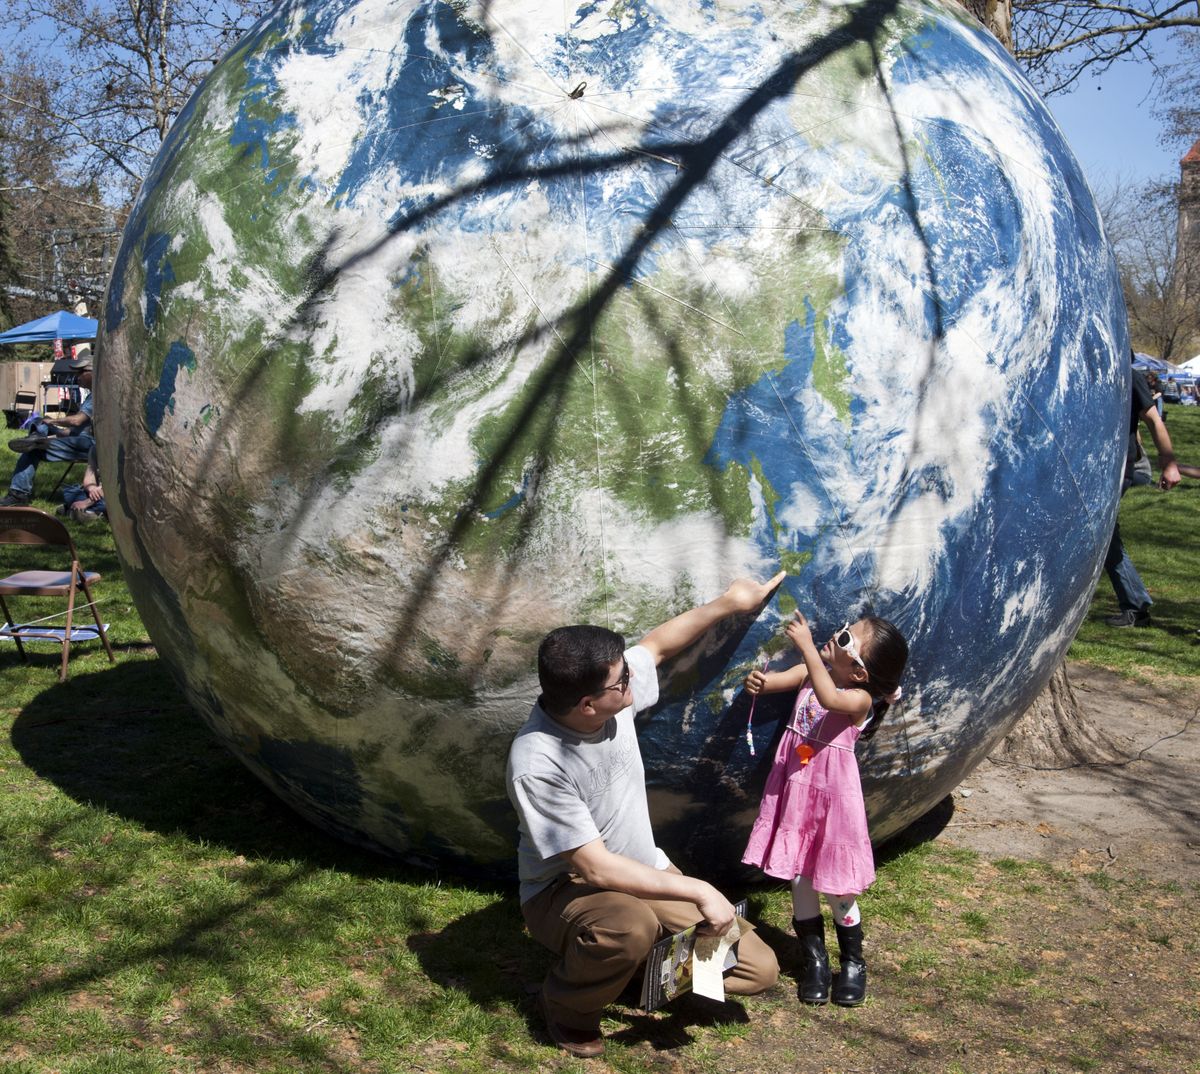 Ram Khadka shows his daughter, Roselyn, 3, a location along the coast of Japan as the pair visit Earth Day 2015 on Saturday in Spokane’s Riverfront Park. Khadka and his family are from Bhutan but are refugees from Nepal. (Dan Pelle)